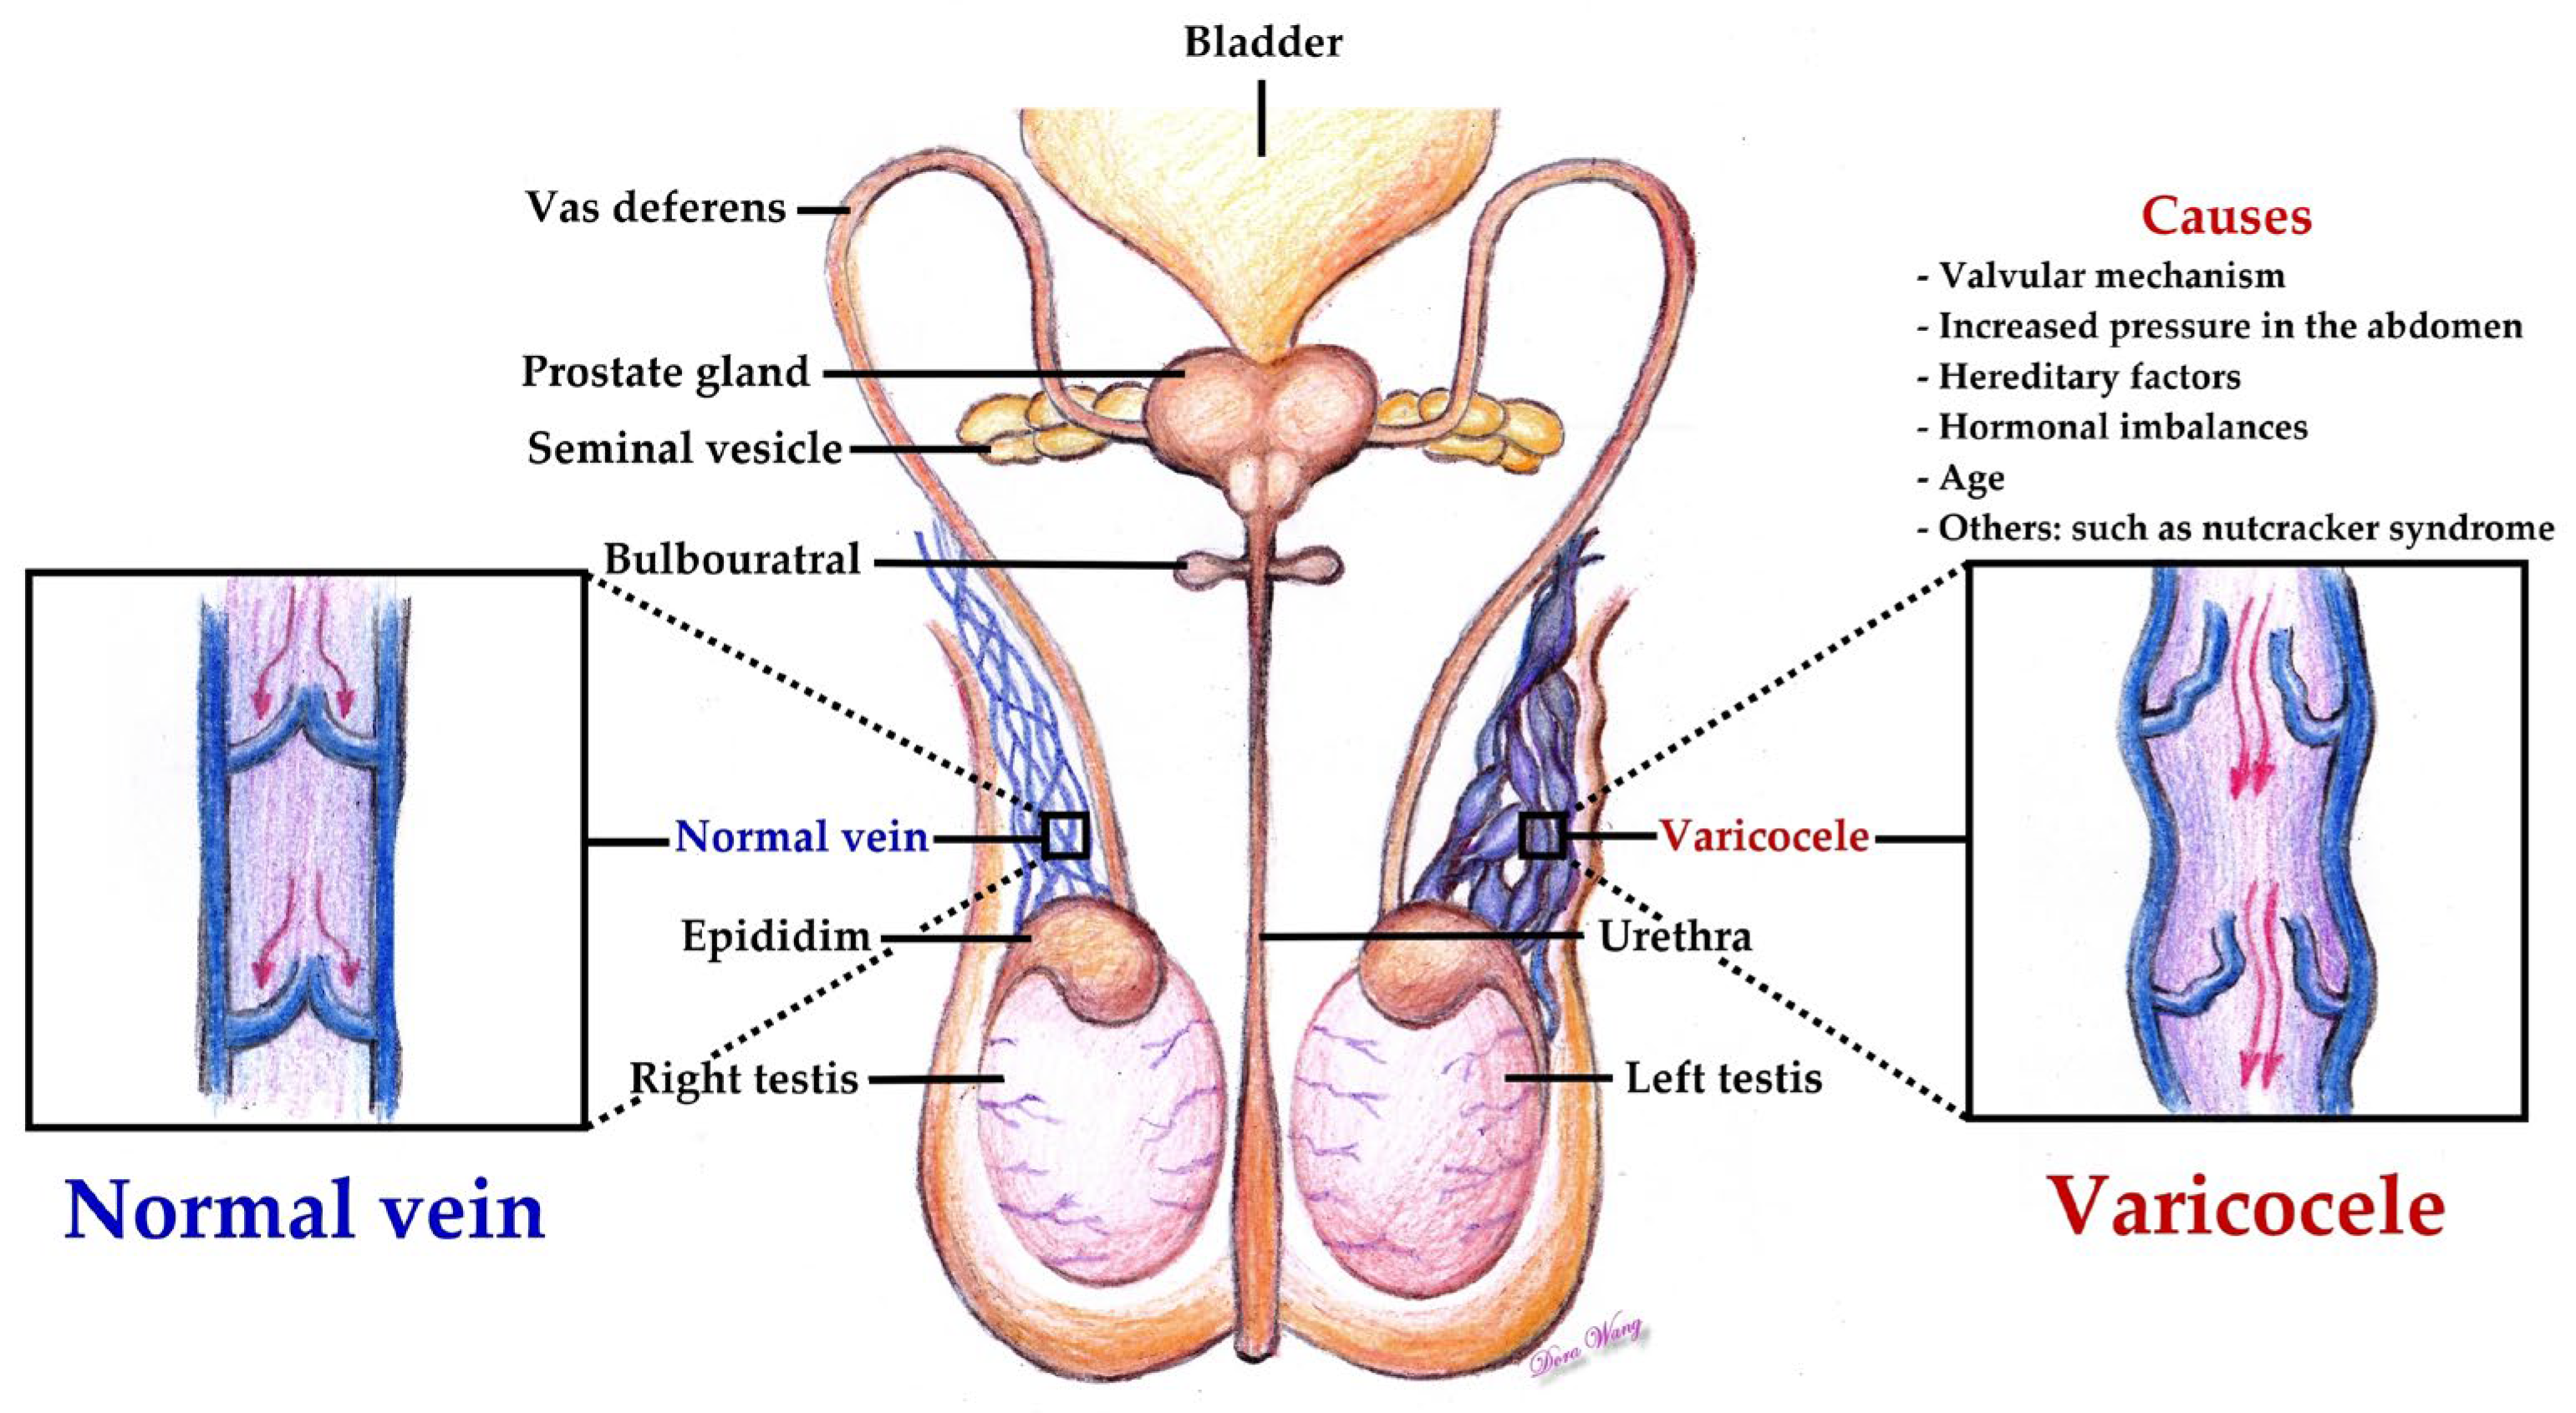 CRETO Scrotal Support, for varicocele and hydrocele lift to the